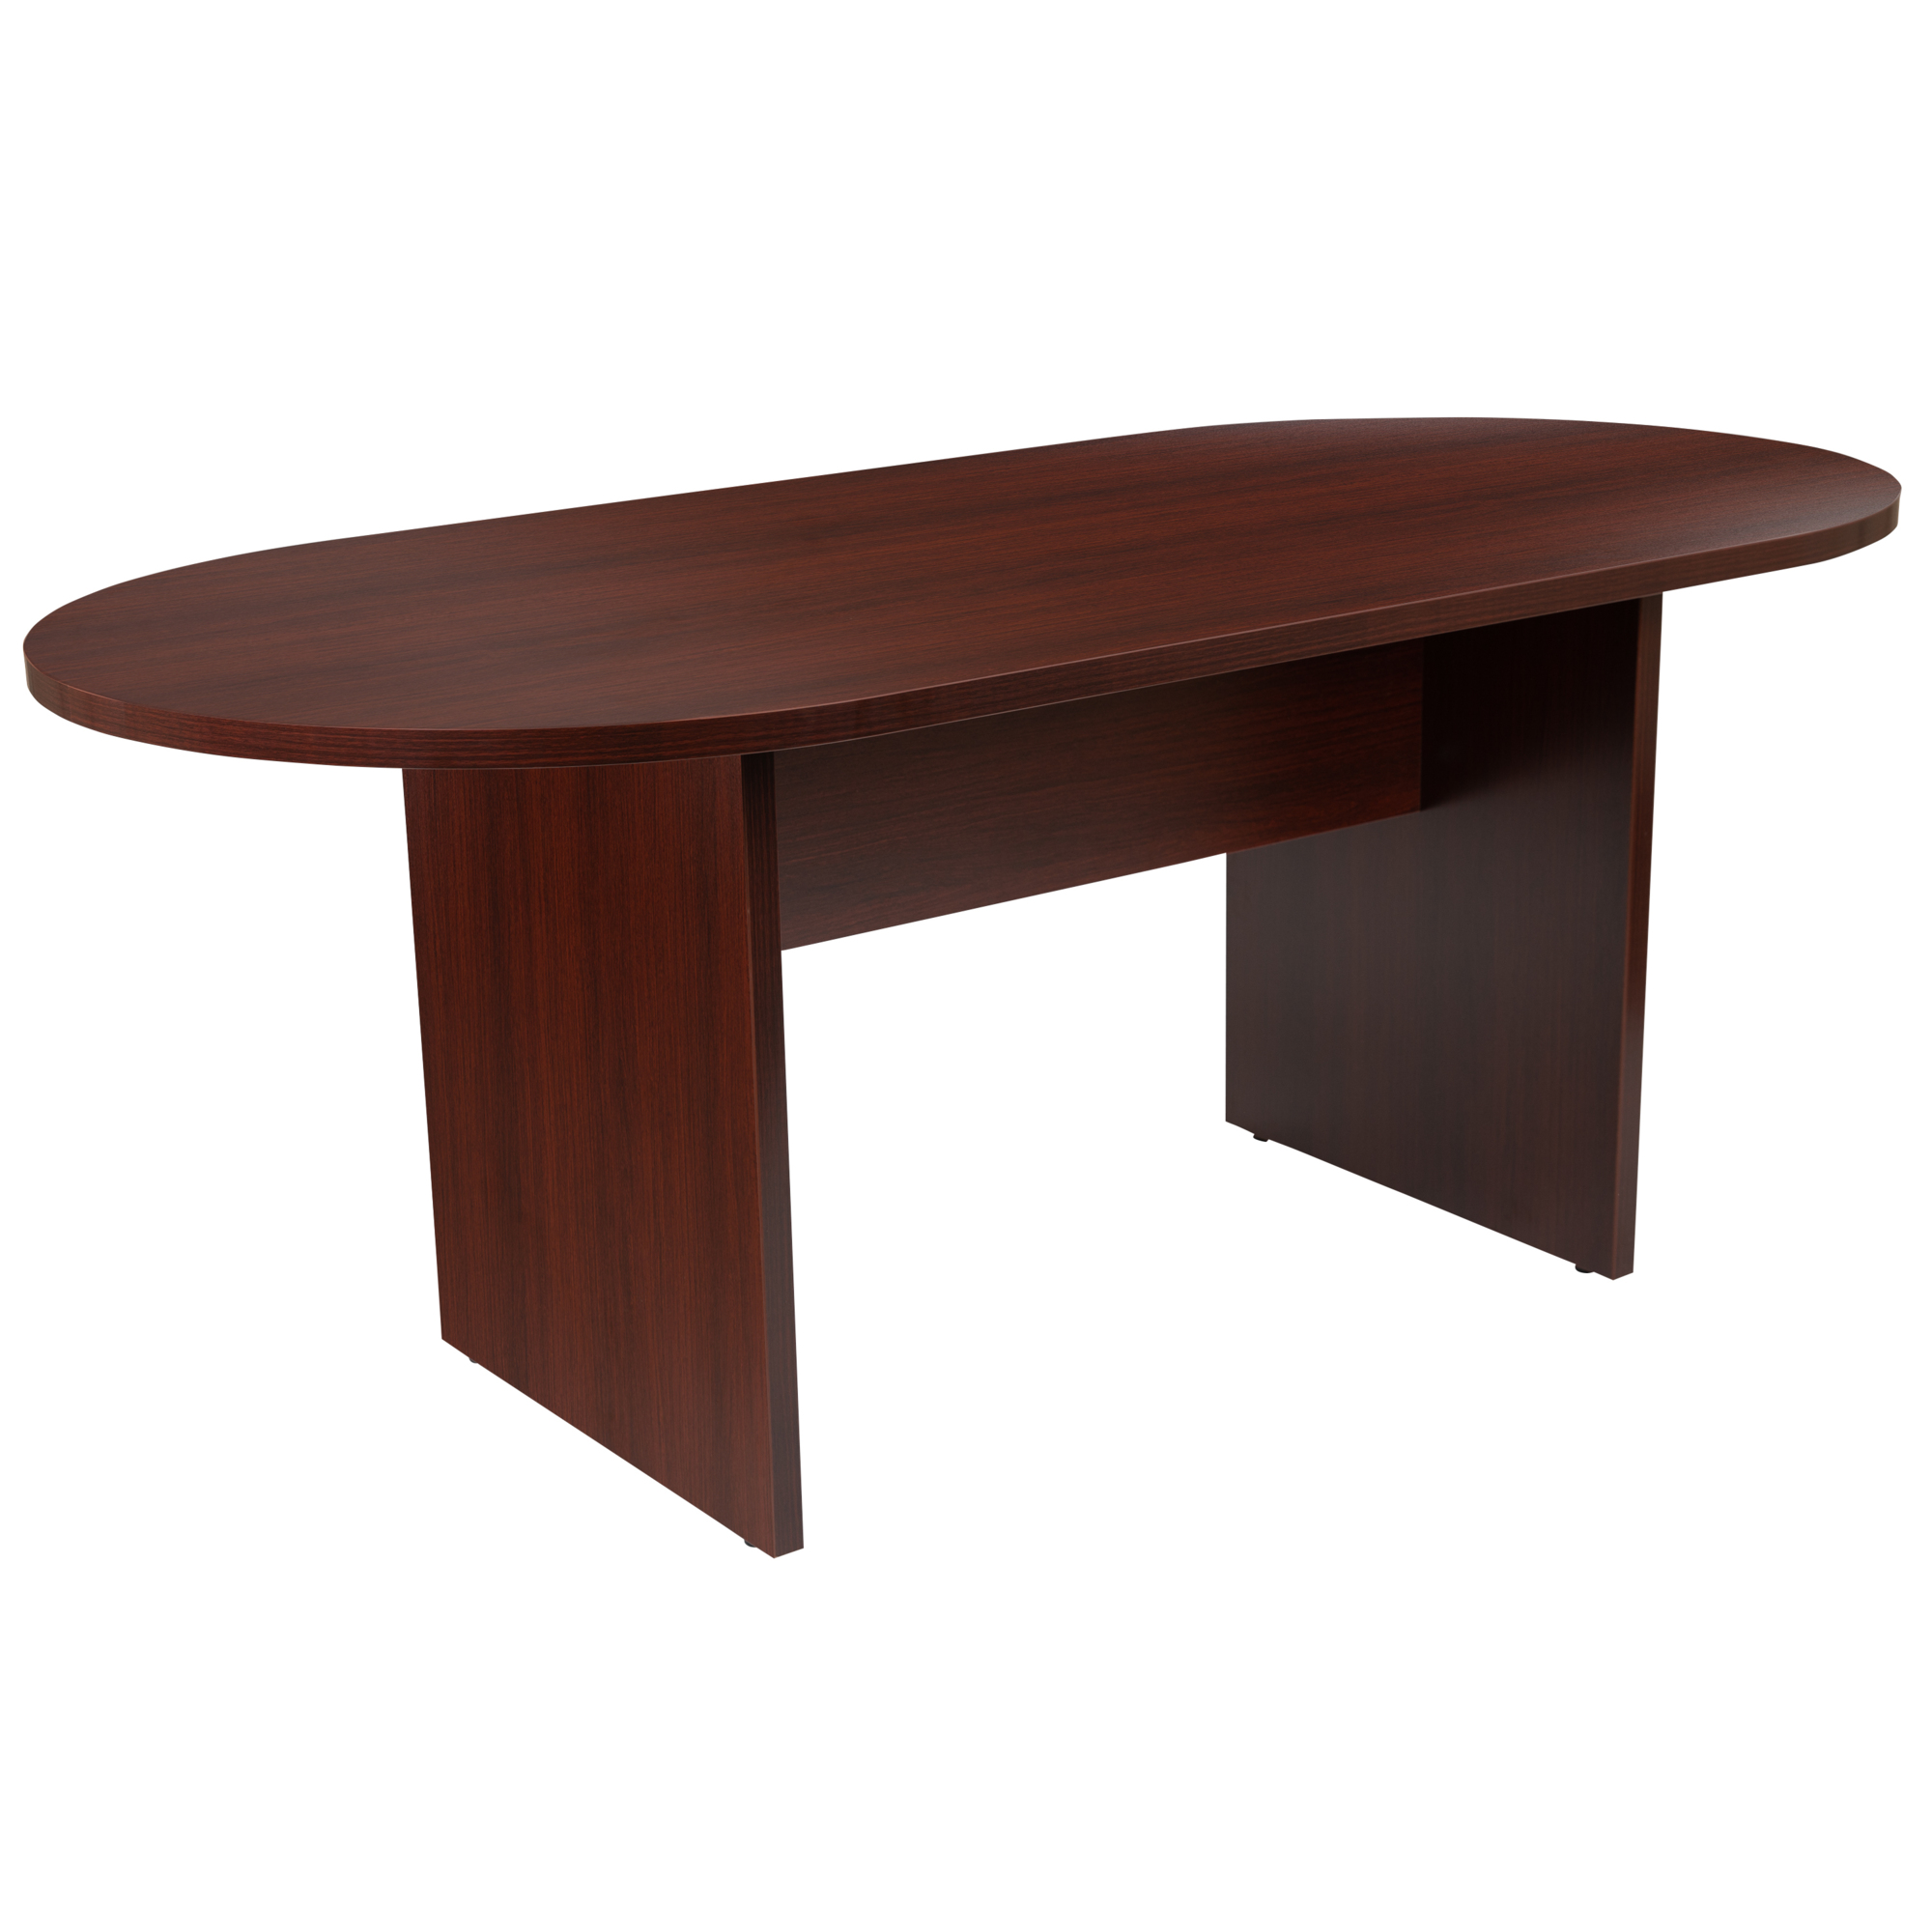 Flash Furniture, 6ft. (72Inch) Oval Conference Table in Mahogany, Height 29.5 in, Width 35 in, Length 72 in, Model GCTL1035MHG